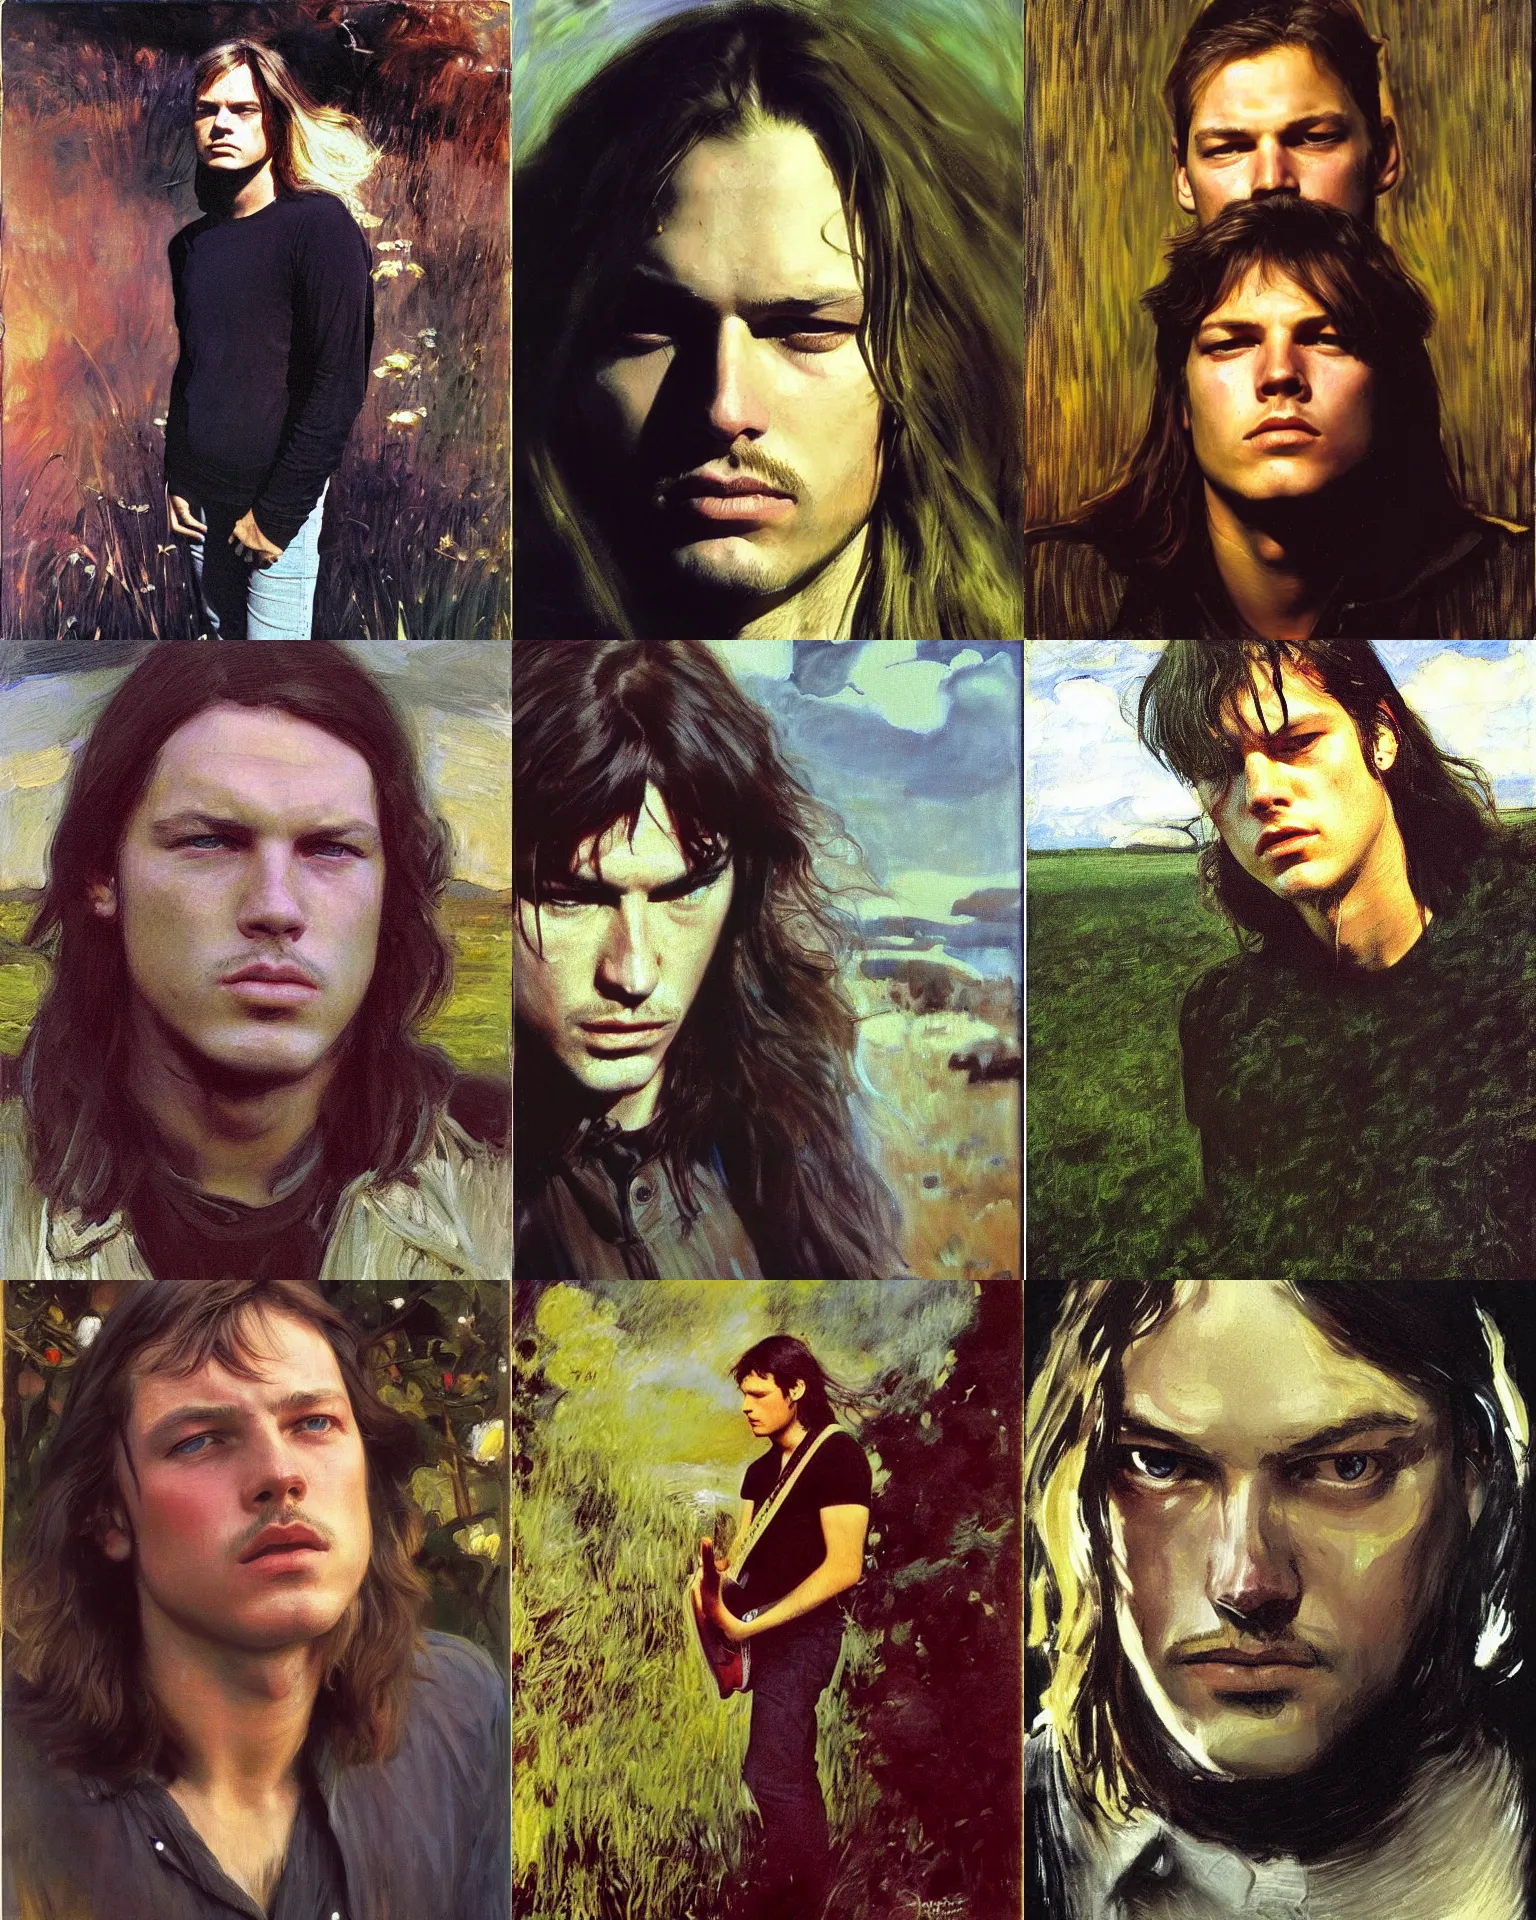 Prompt: david gilmour age 1 9 7 0 dramatic expression, plein air portrait painting by john singer sargent, john william waterhouse, donato giancola, fashion photography, psychedelic